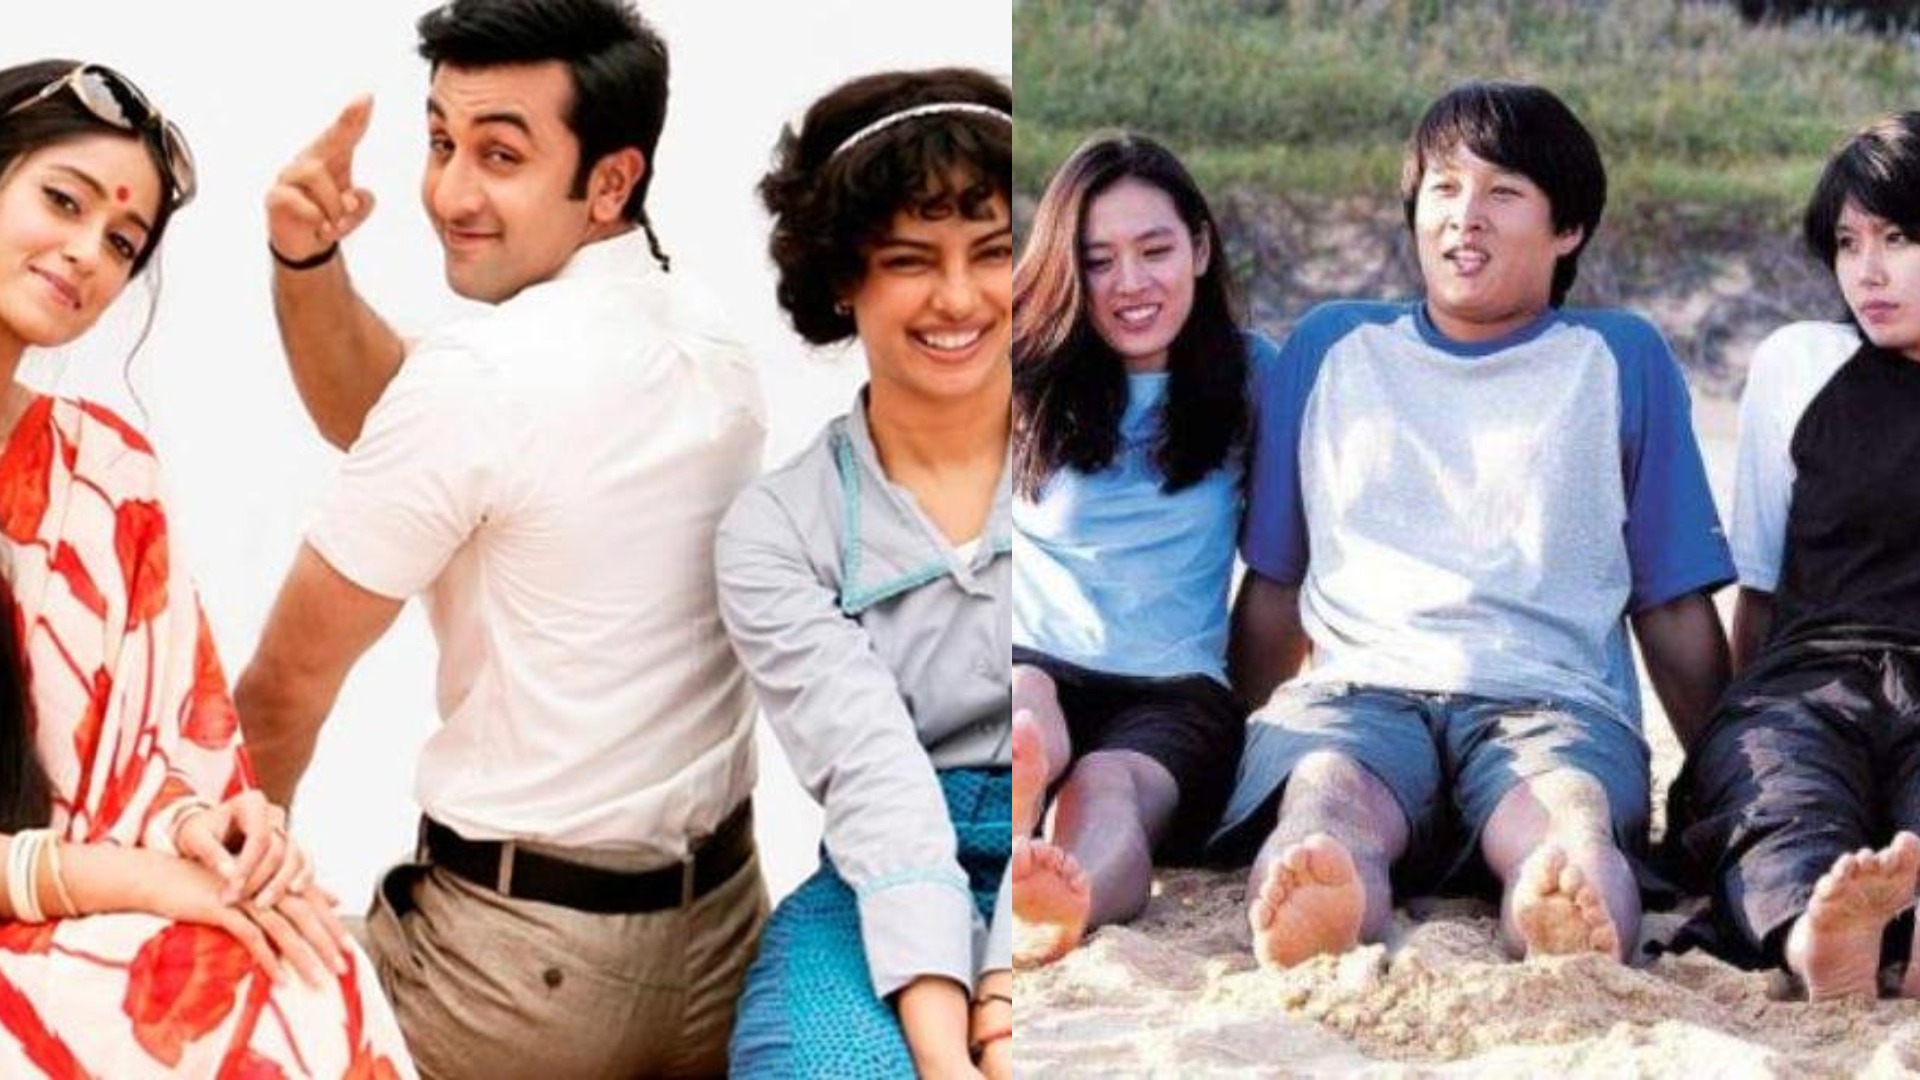 8 Bollywood Films Which Are Inspired By South Korean Movies RVCJ Media